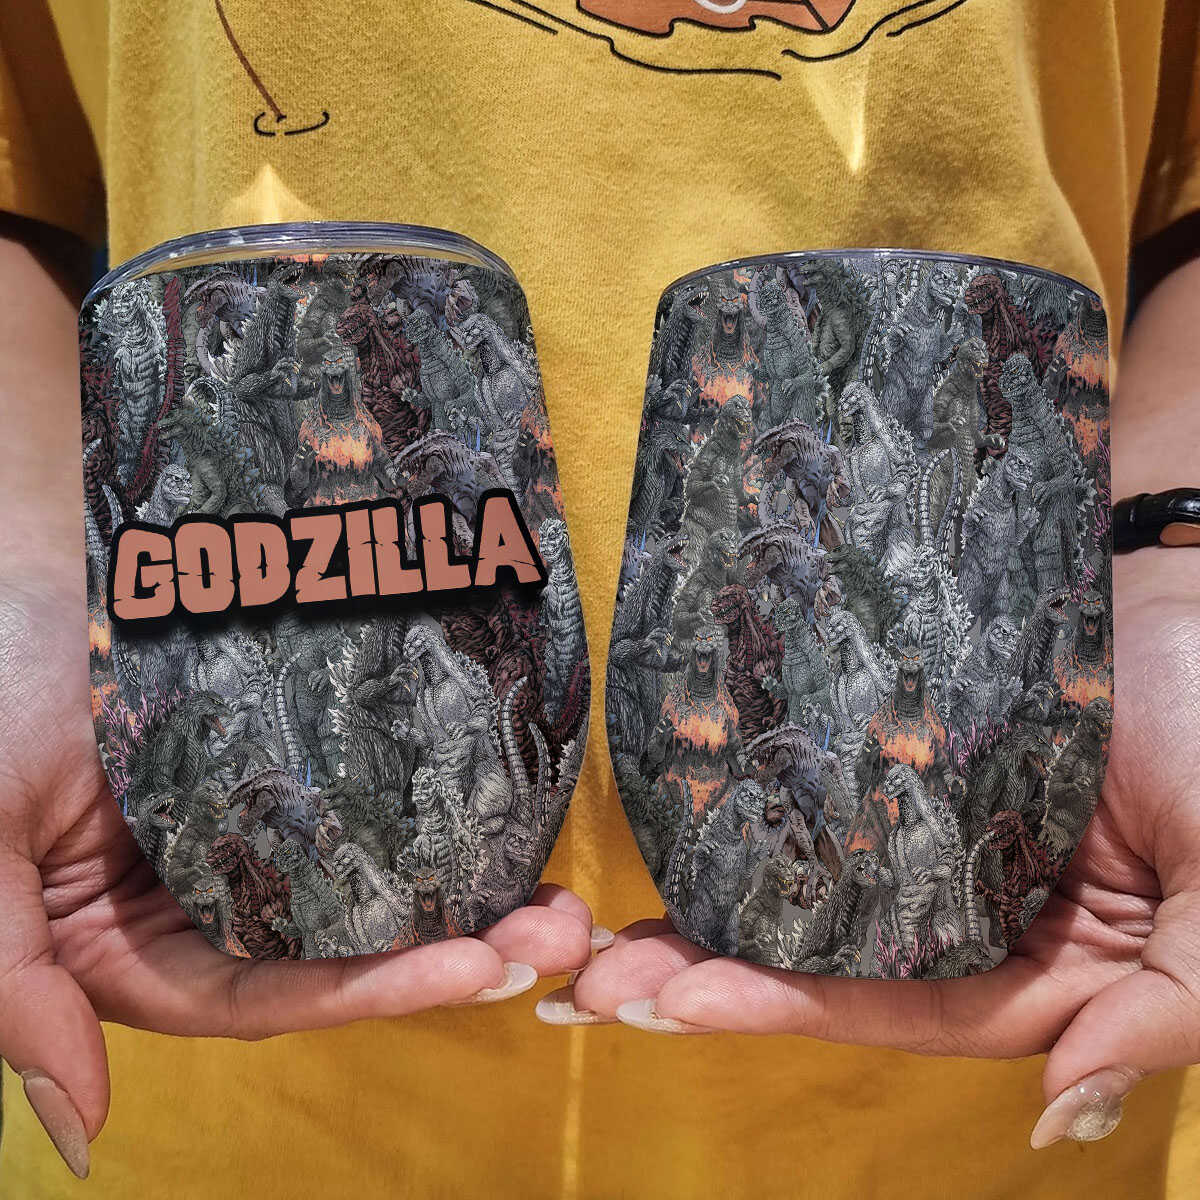 Dinosaur Feet Slippers With Sound | In honor of Godzilla returning to the  big screen with Godzilla King of the Monsters we want to re-introduce you  to our Dinosaur Feet with Sound